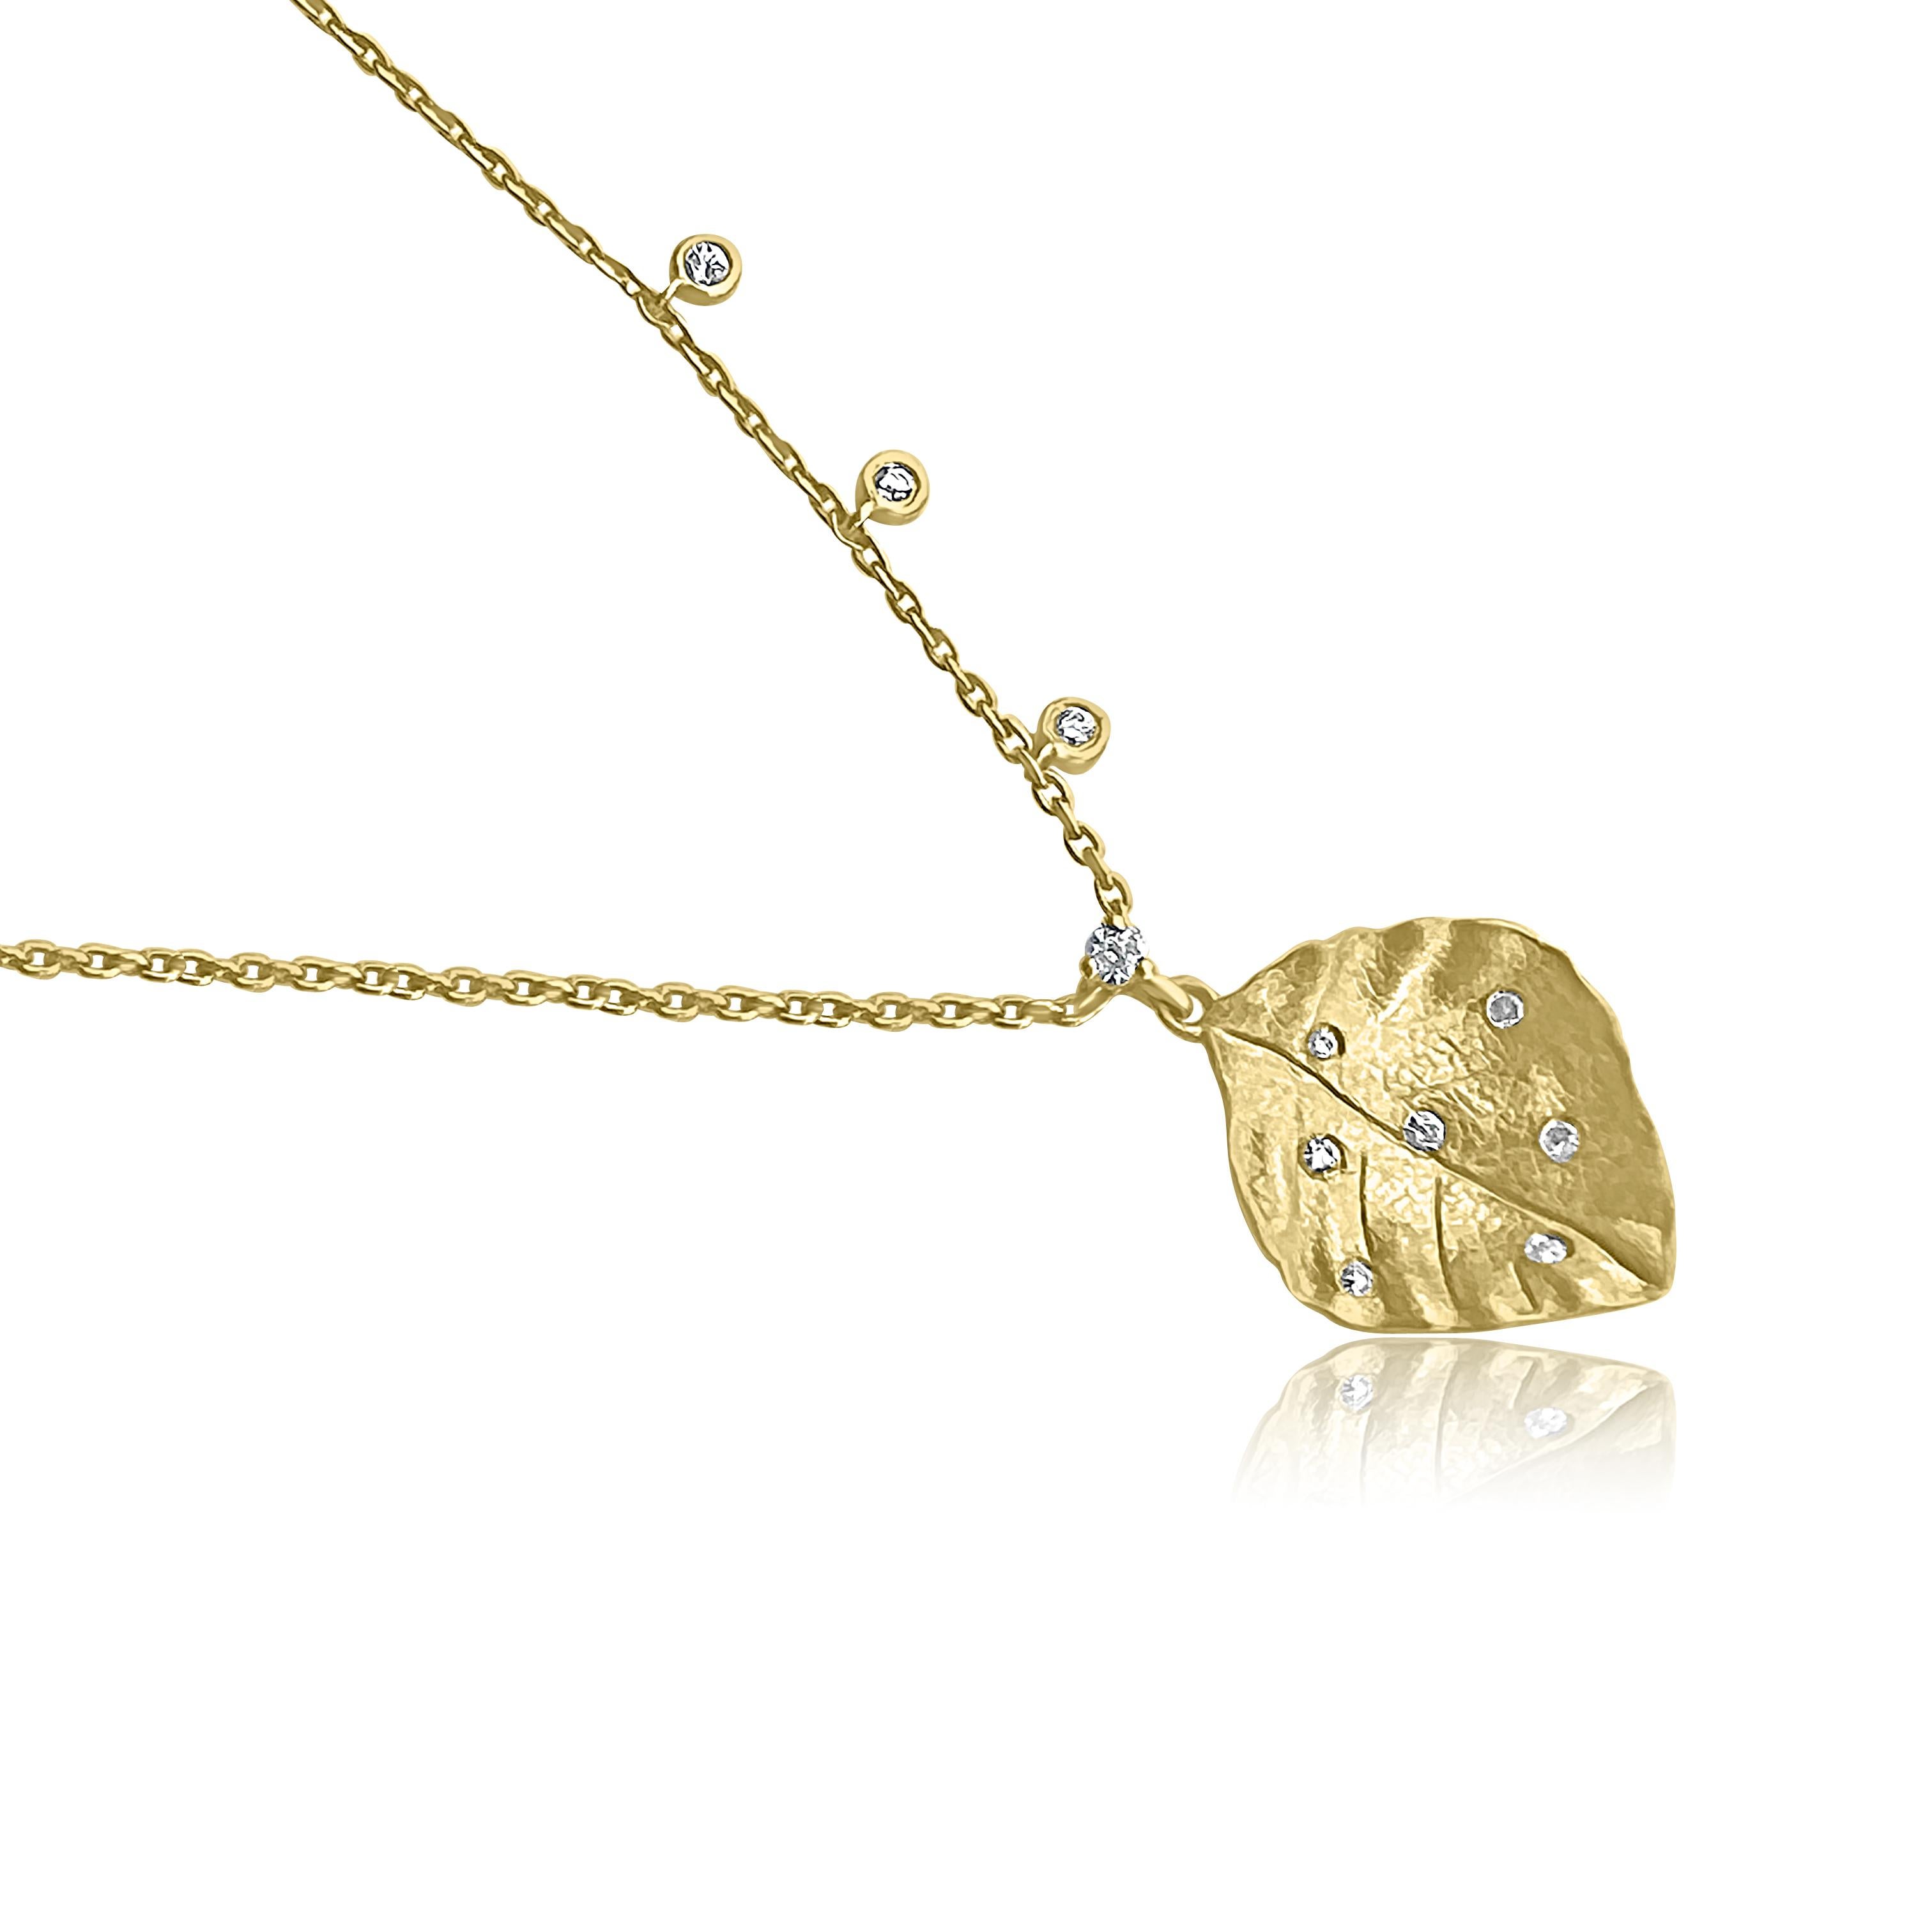 Brilliant Cut Scattered Diamonds Leaf Necklace with Three Asymmetrical Diamond Charms For Sale